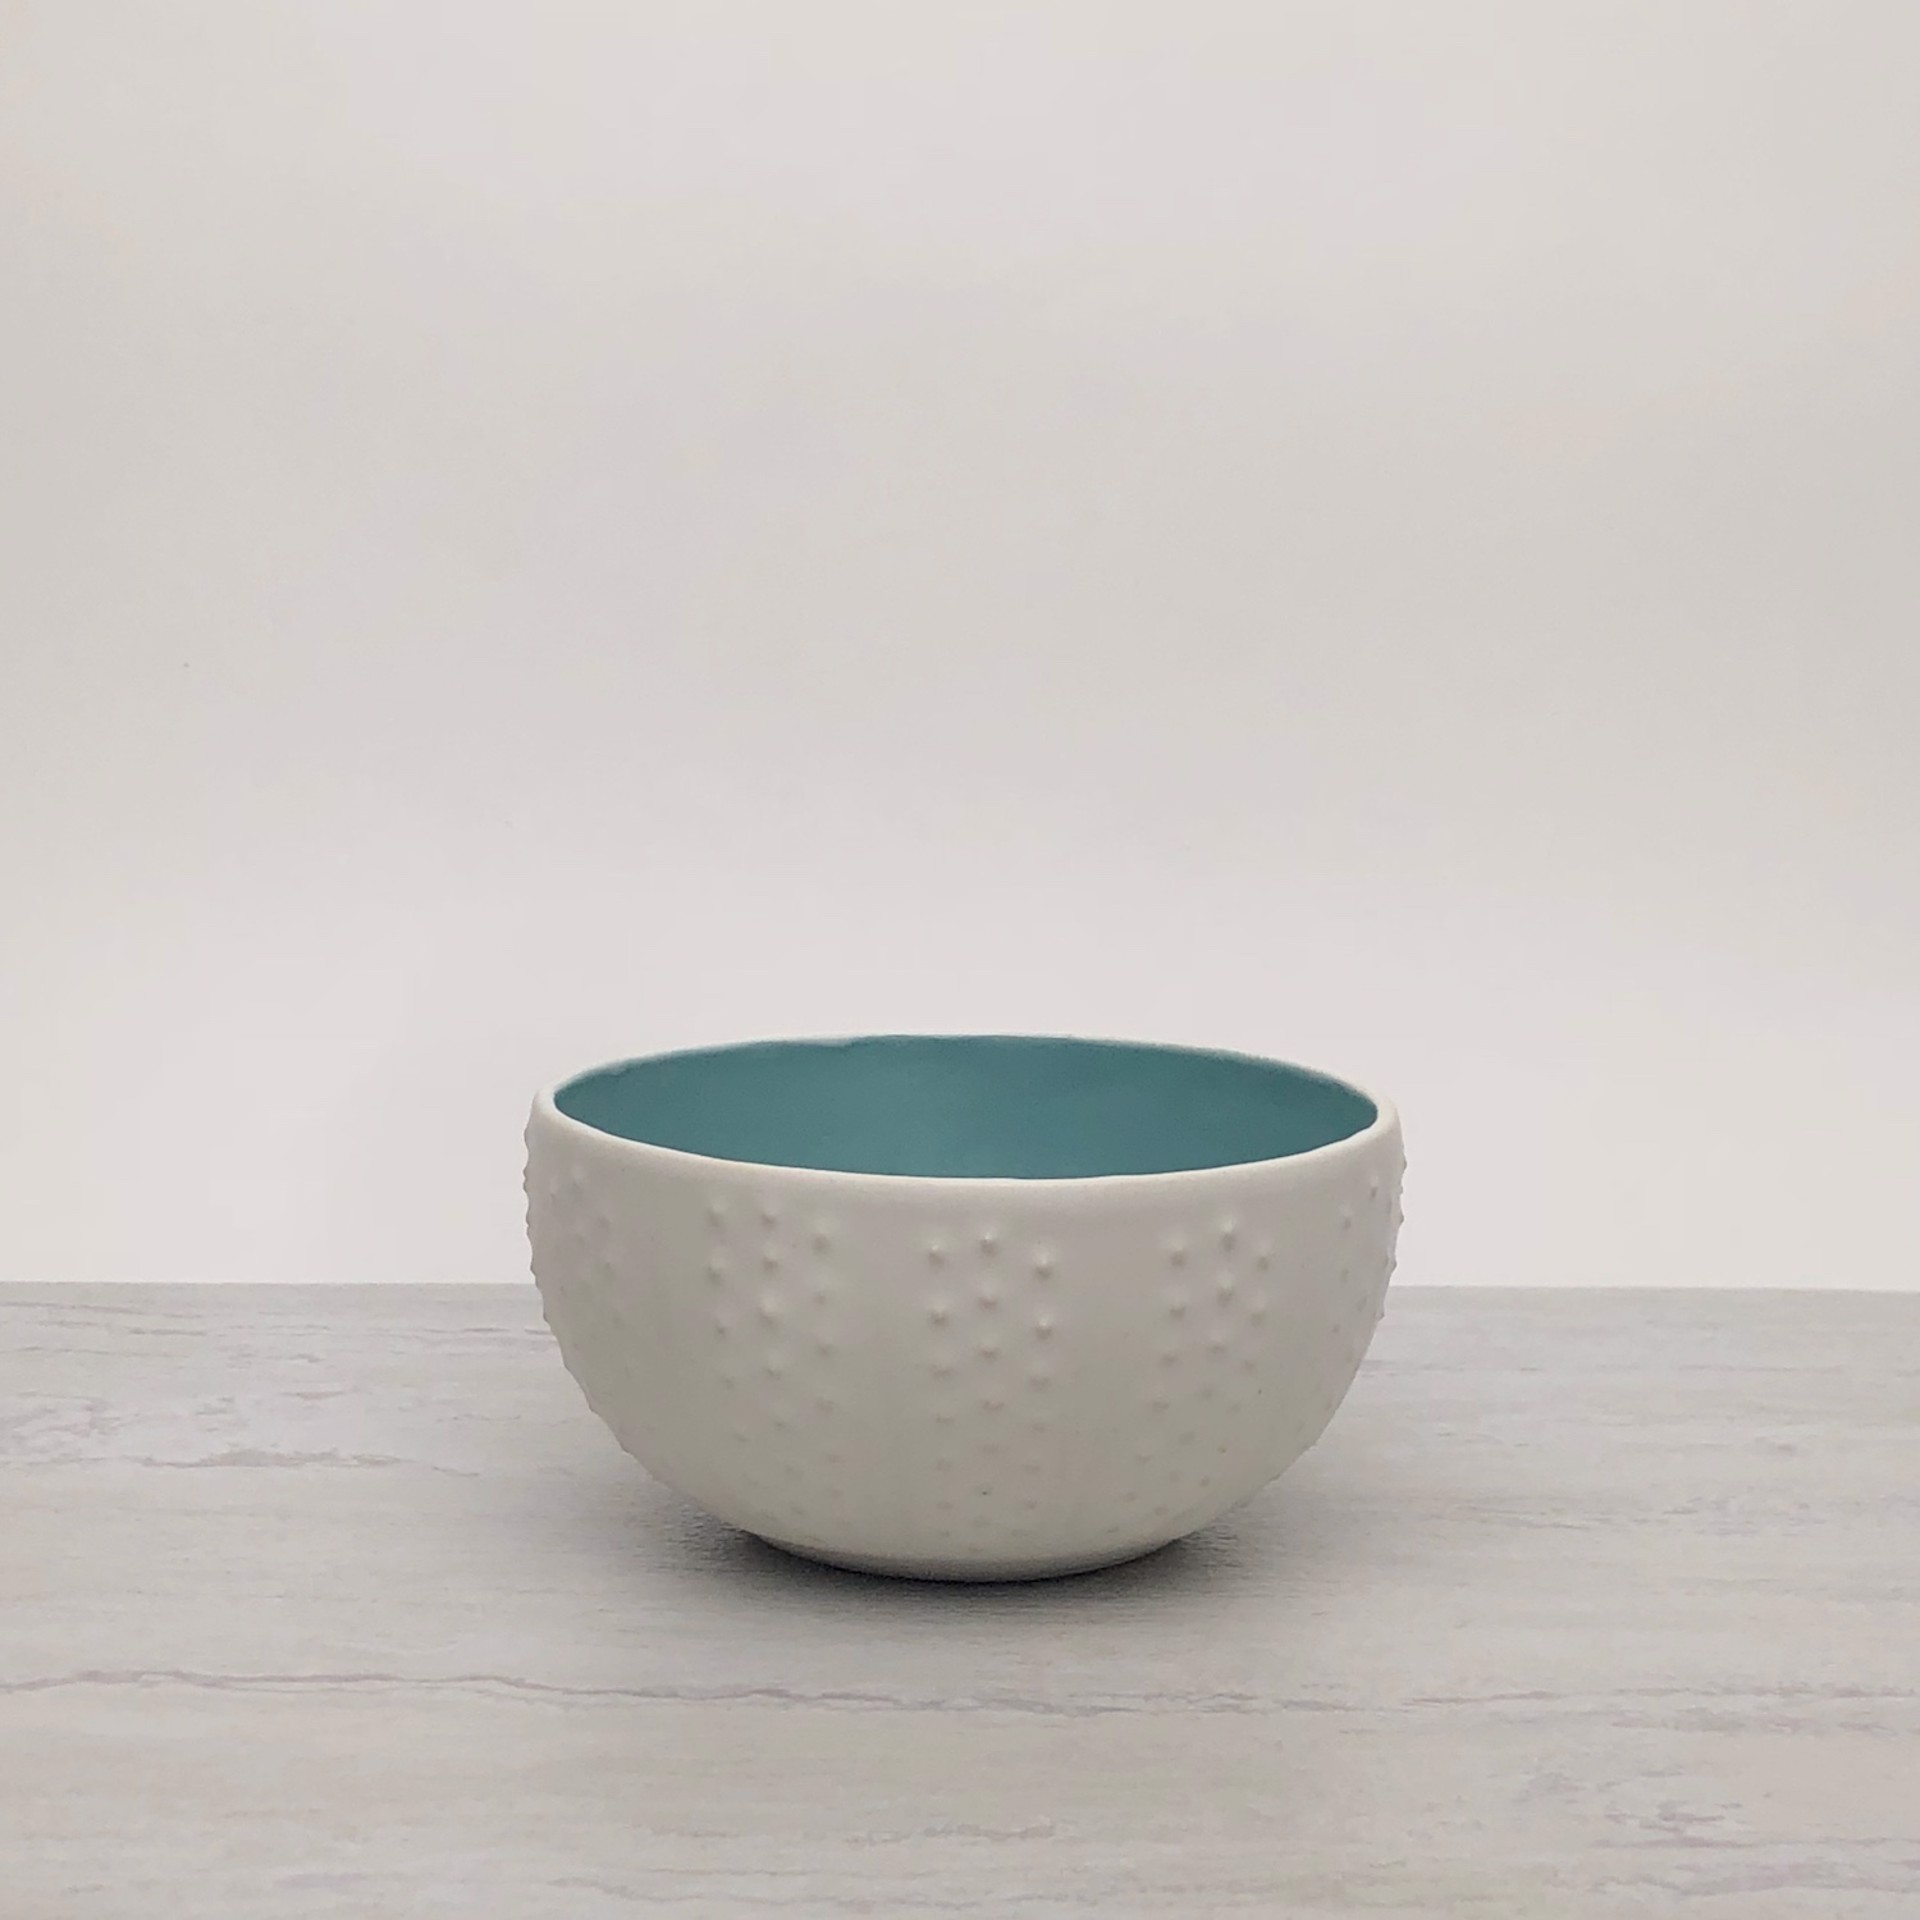 #30 urchin cereal bowl by Leah Streetman